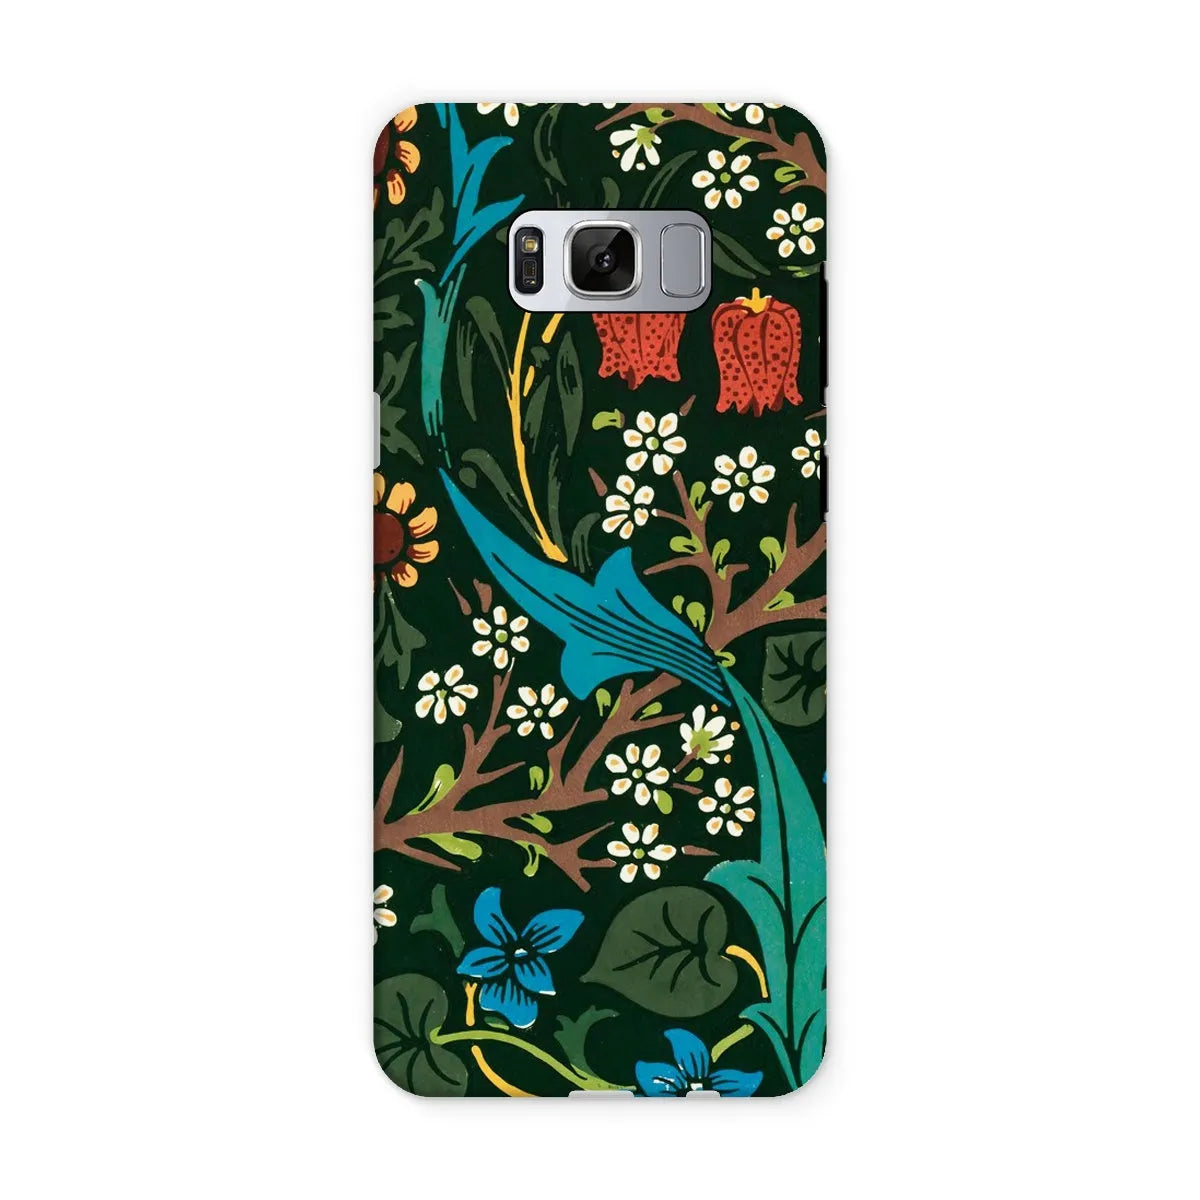 Blackthorn Hawthorn - Floral Phone Case - William Morris - Samsung Galaxy S8 / Matte - Mobile Phone Cases - Aesthetic